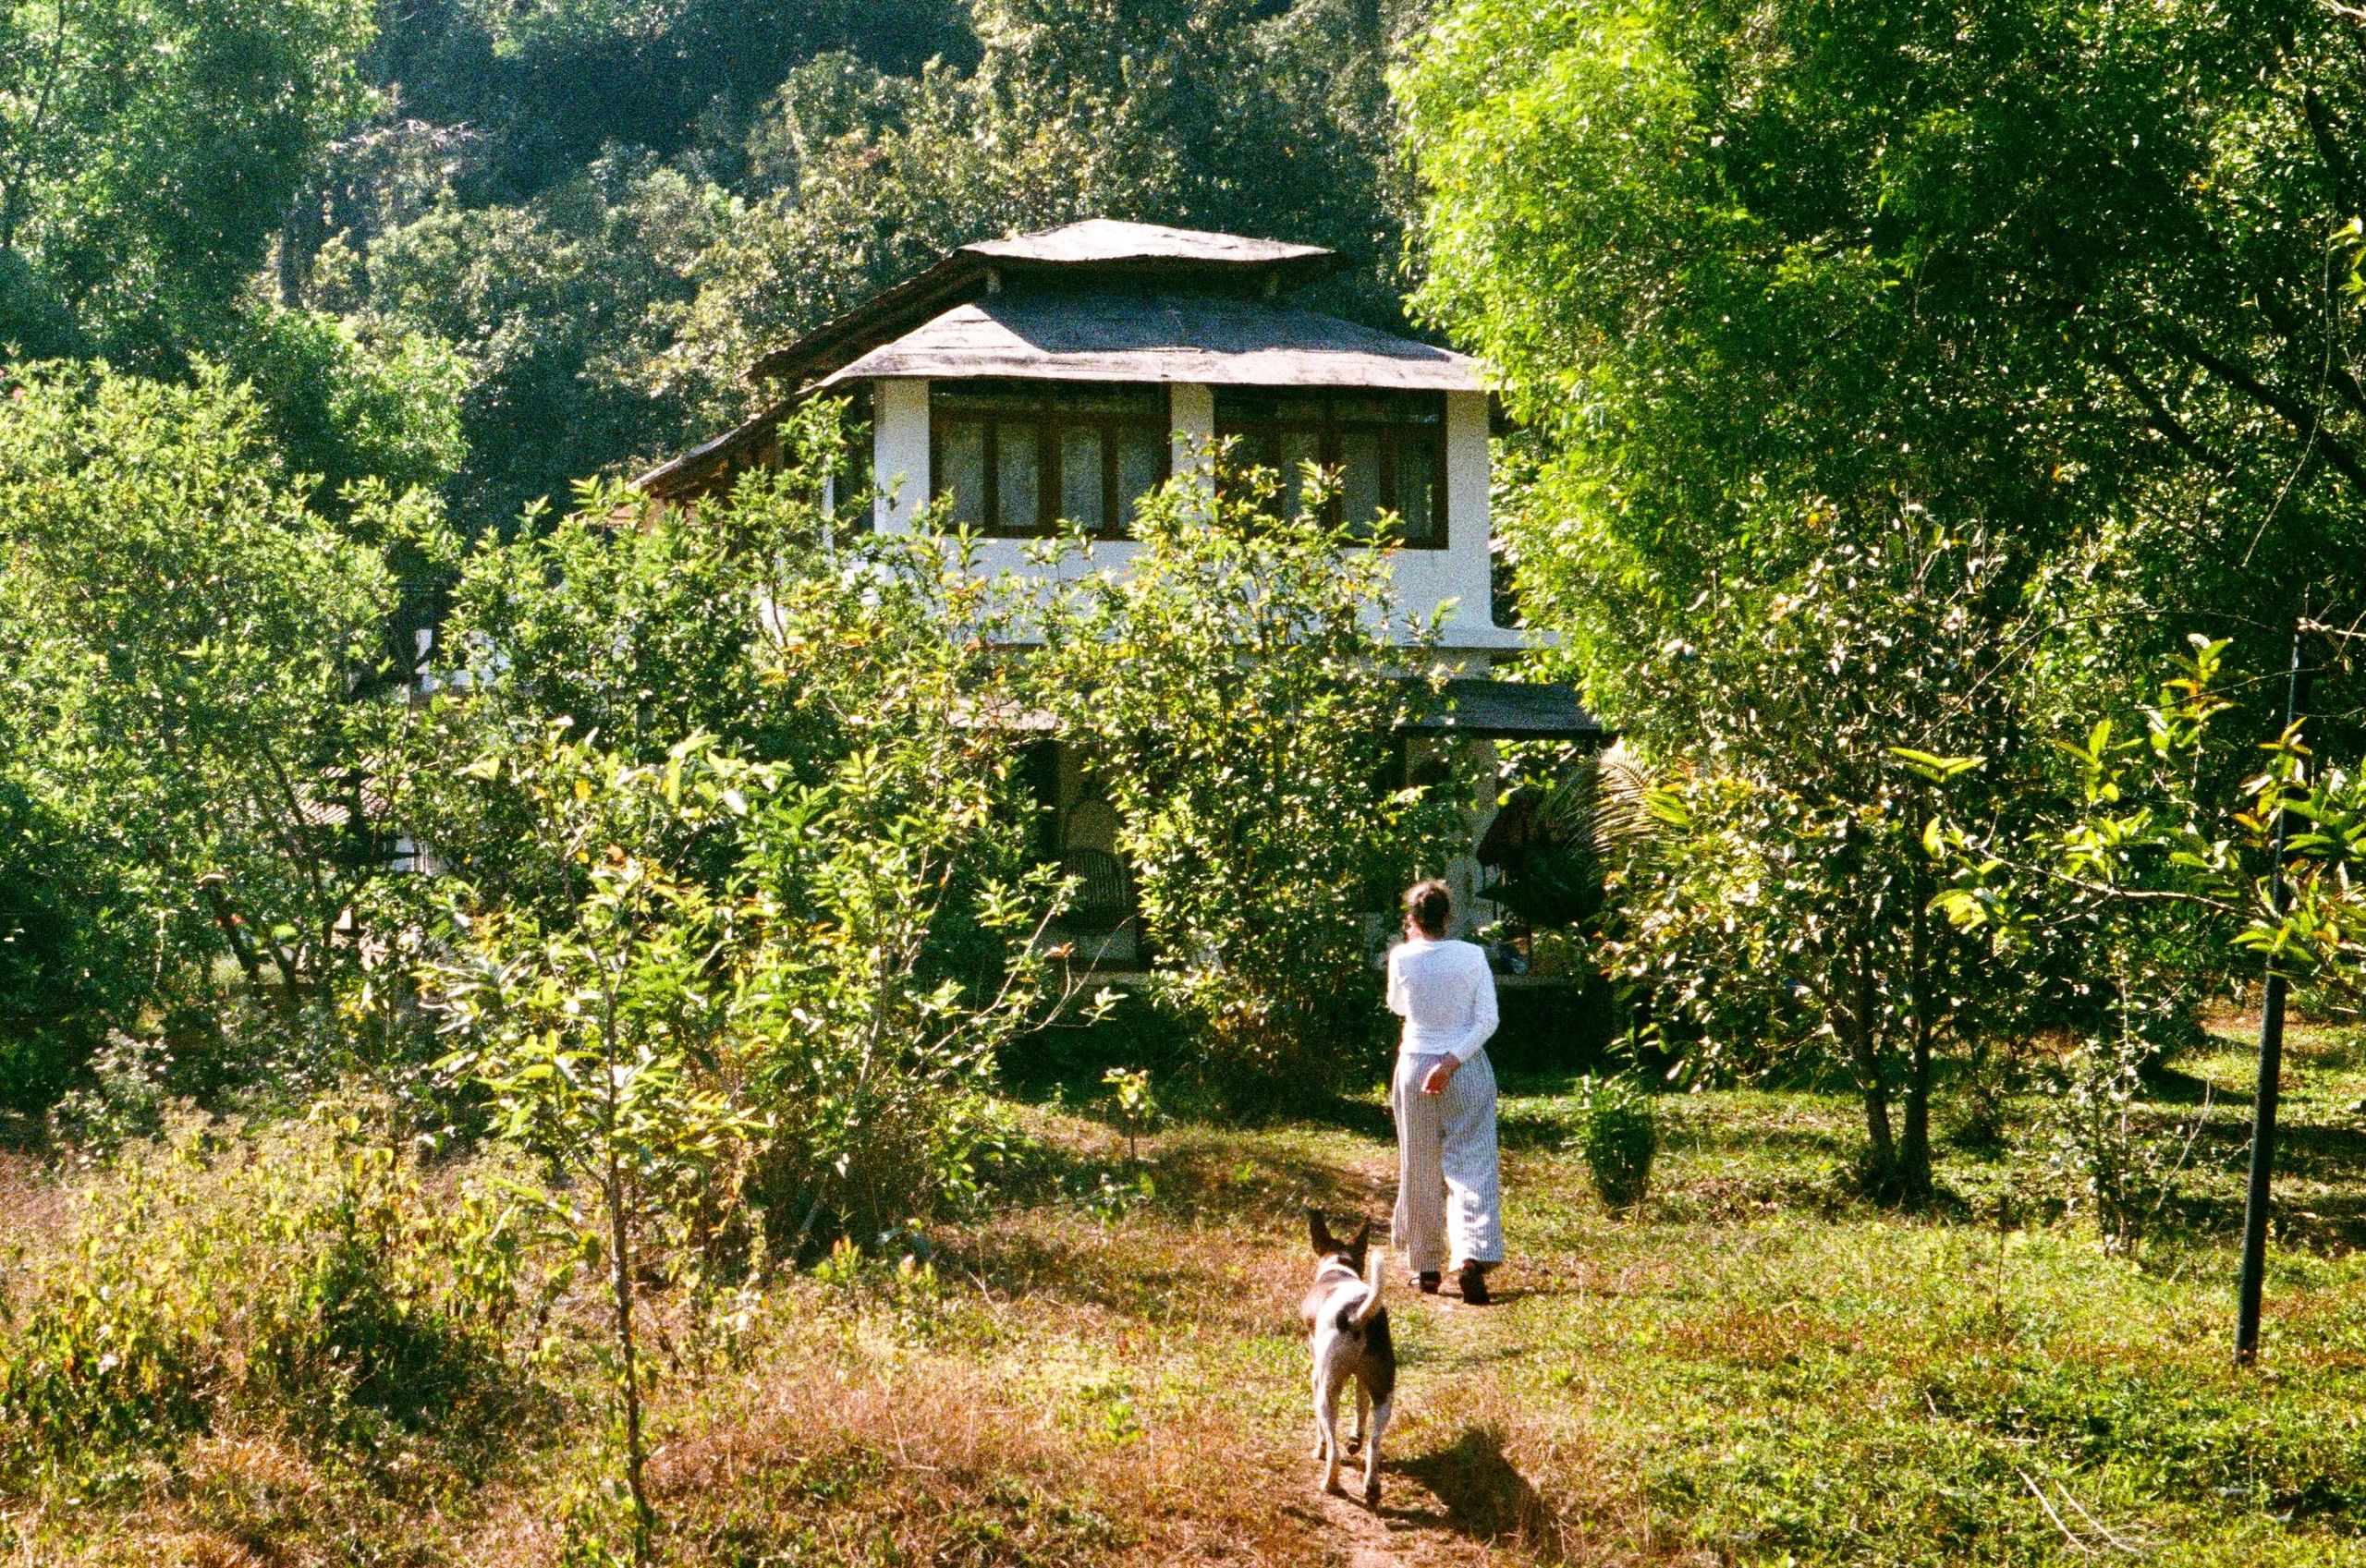 Off The Grid farm accommodation entrance for family vacation and nature lovers, inside the jungle.